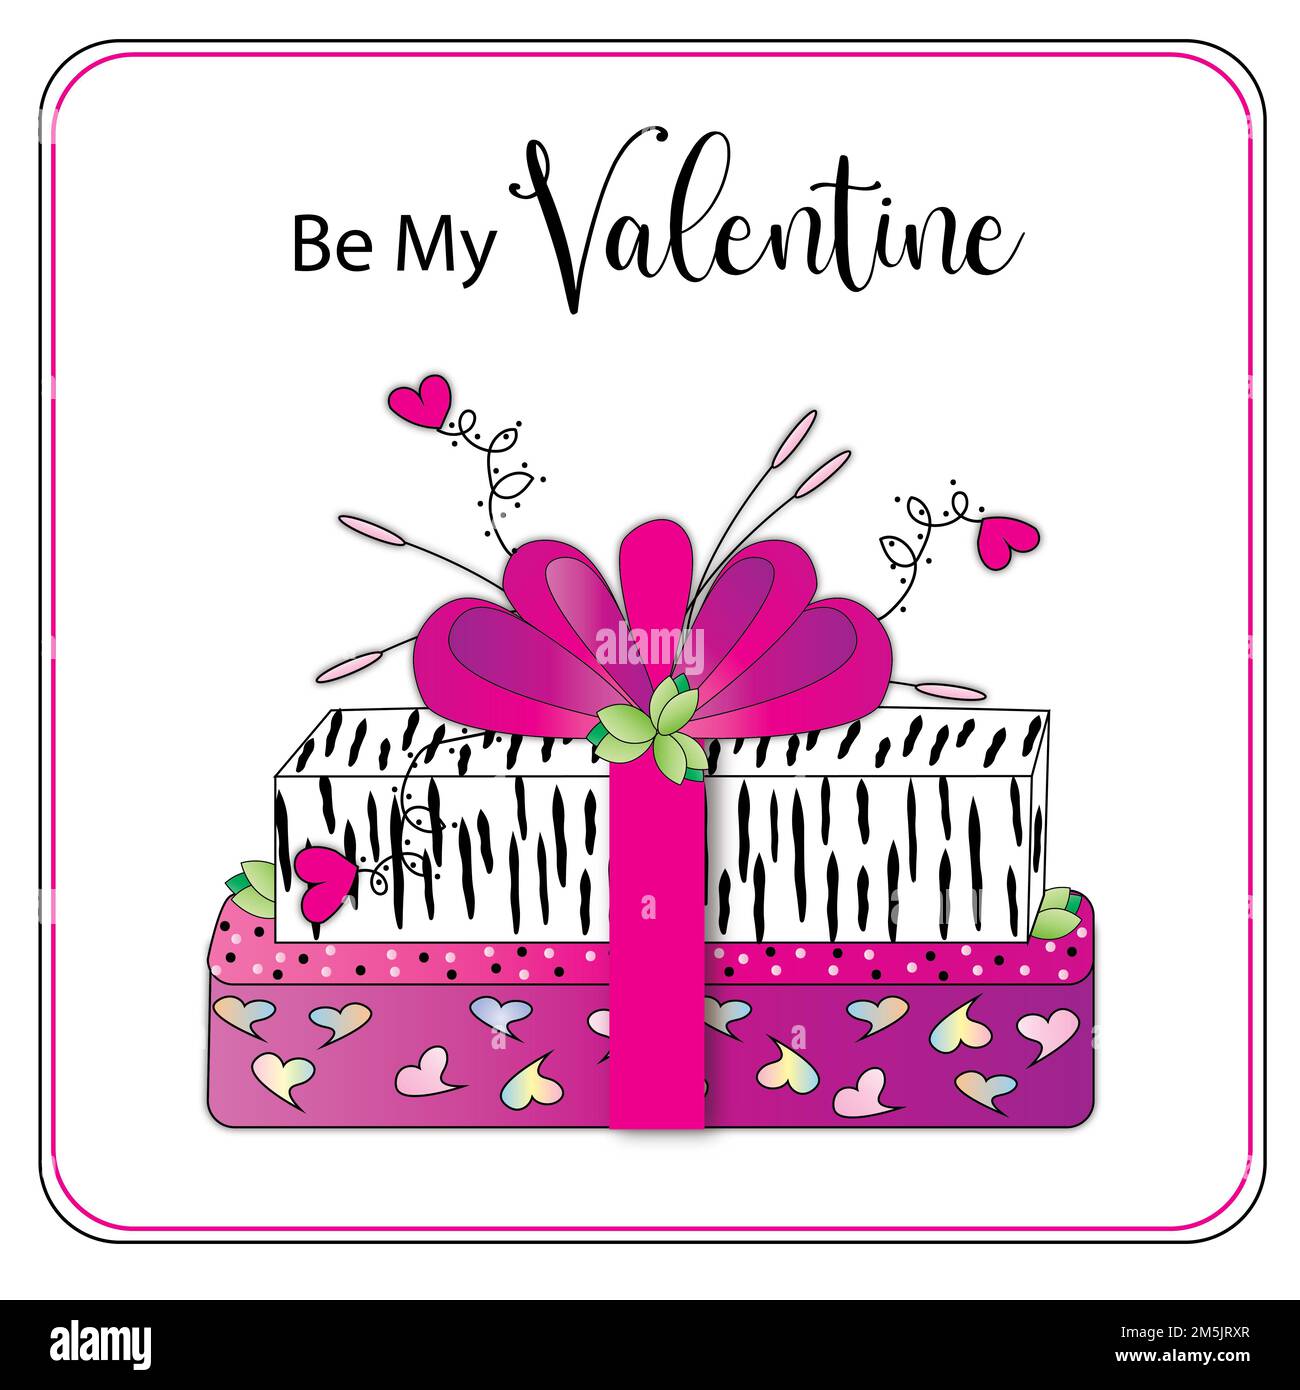 Be My Valentine graphic of presents wrapped in fuchsia and zebra print paper along with decorative hearts.  Isolated on white background Stock Photo